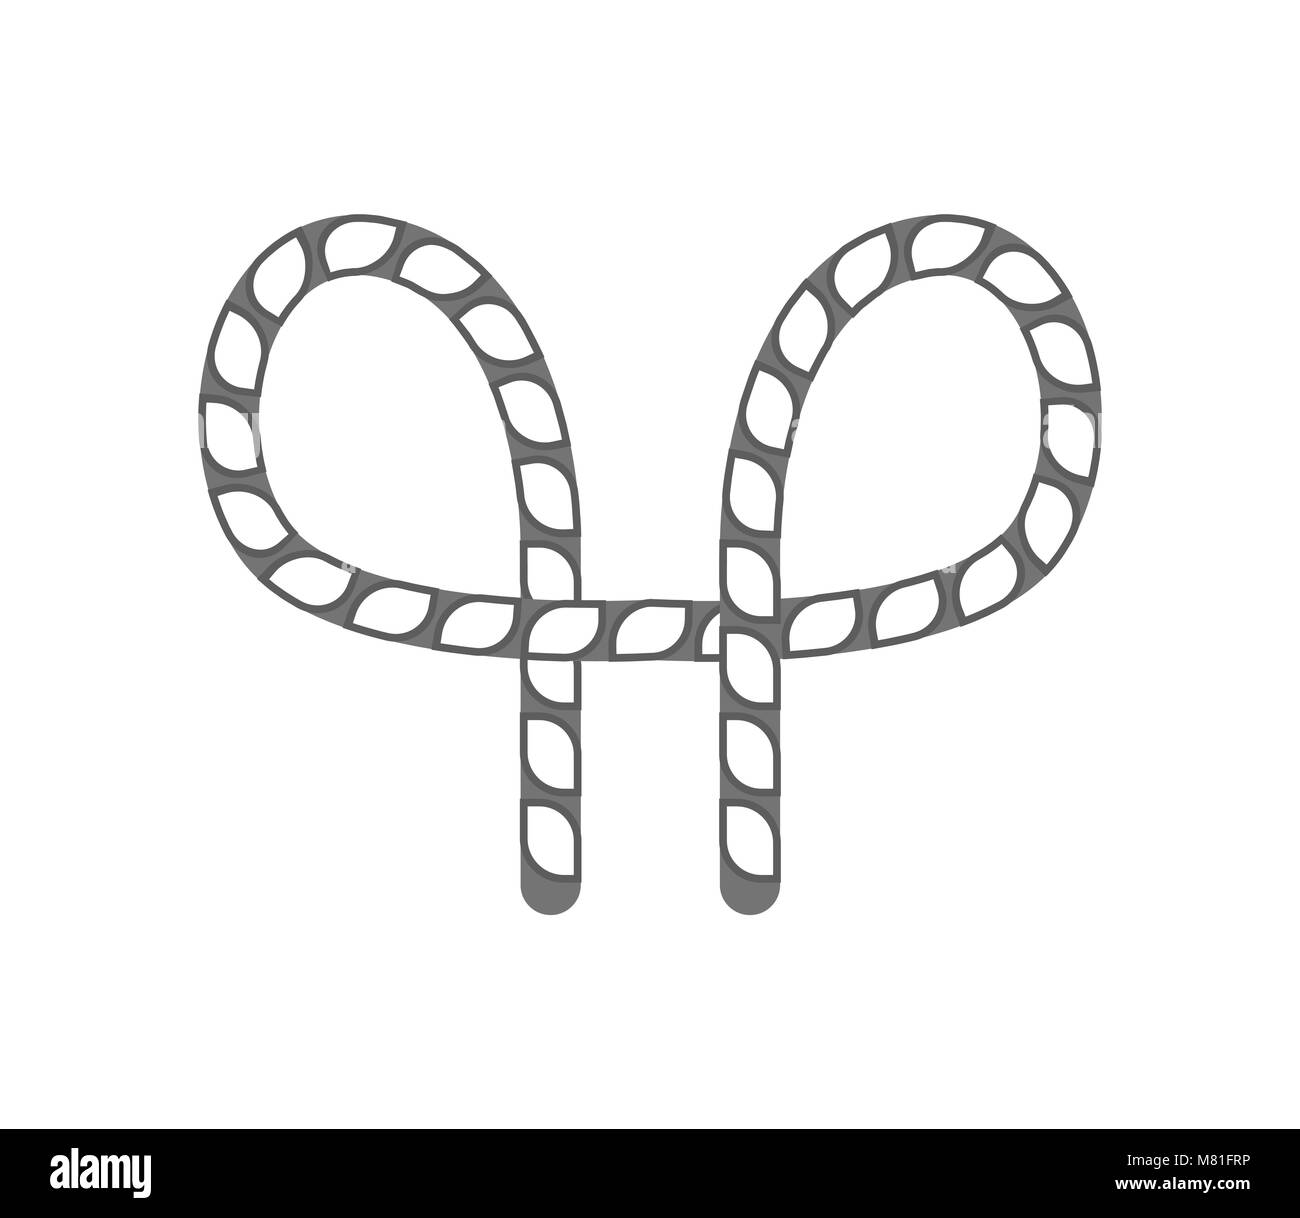 Rope knotting isolated vector icon Stock Vector